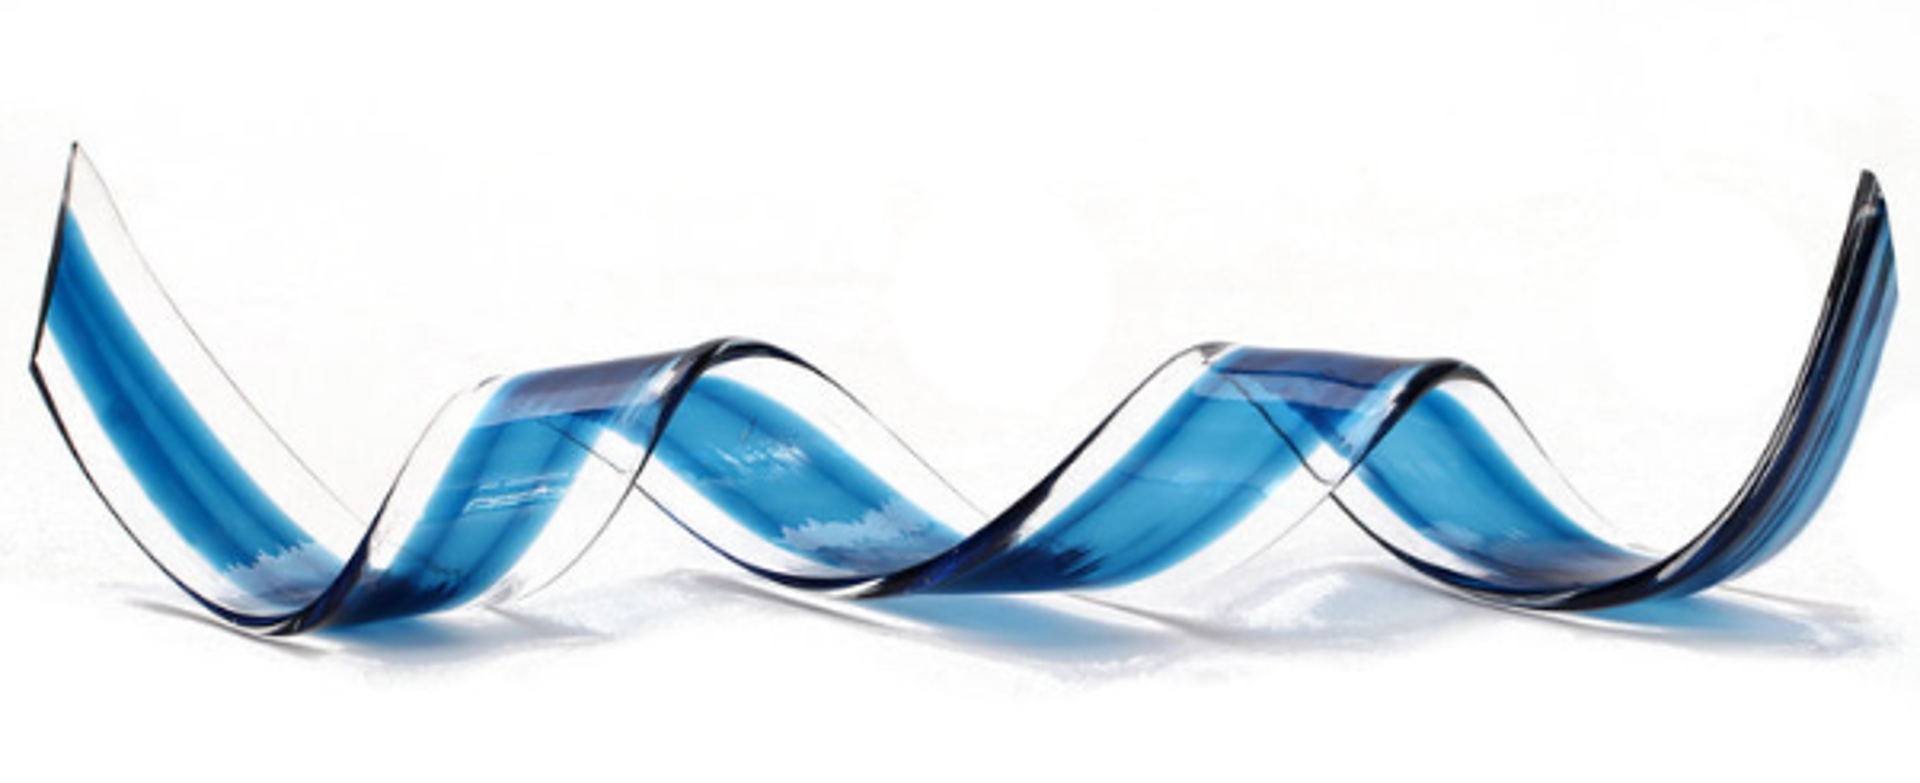 Curled Ribbon Table Top - 7567 by V Handblown Glass